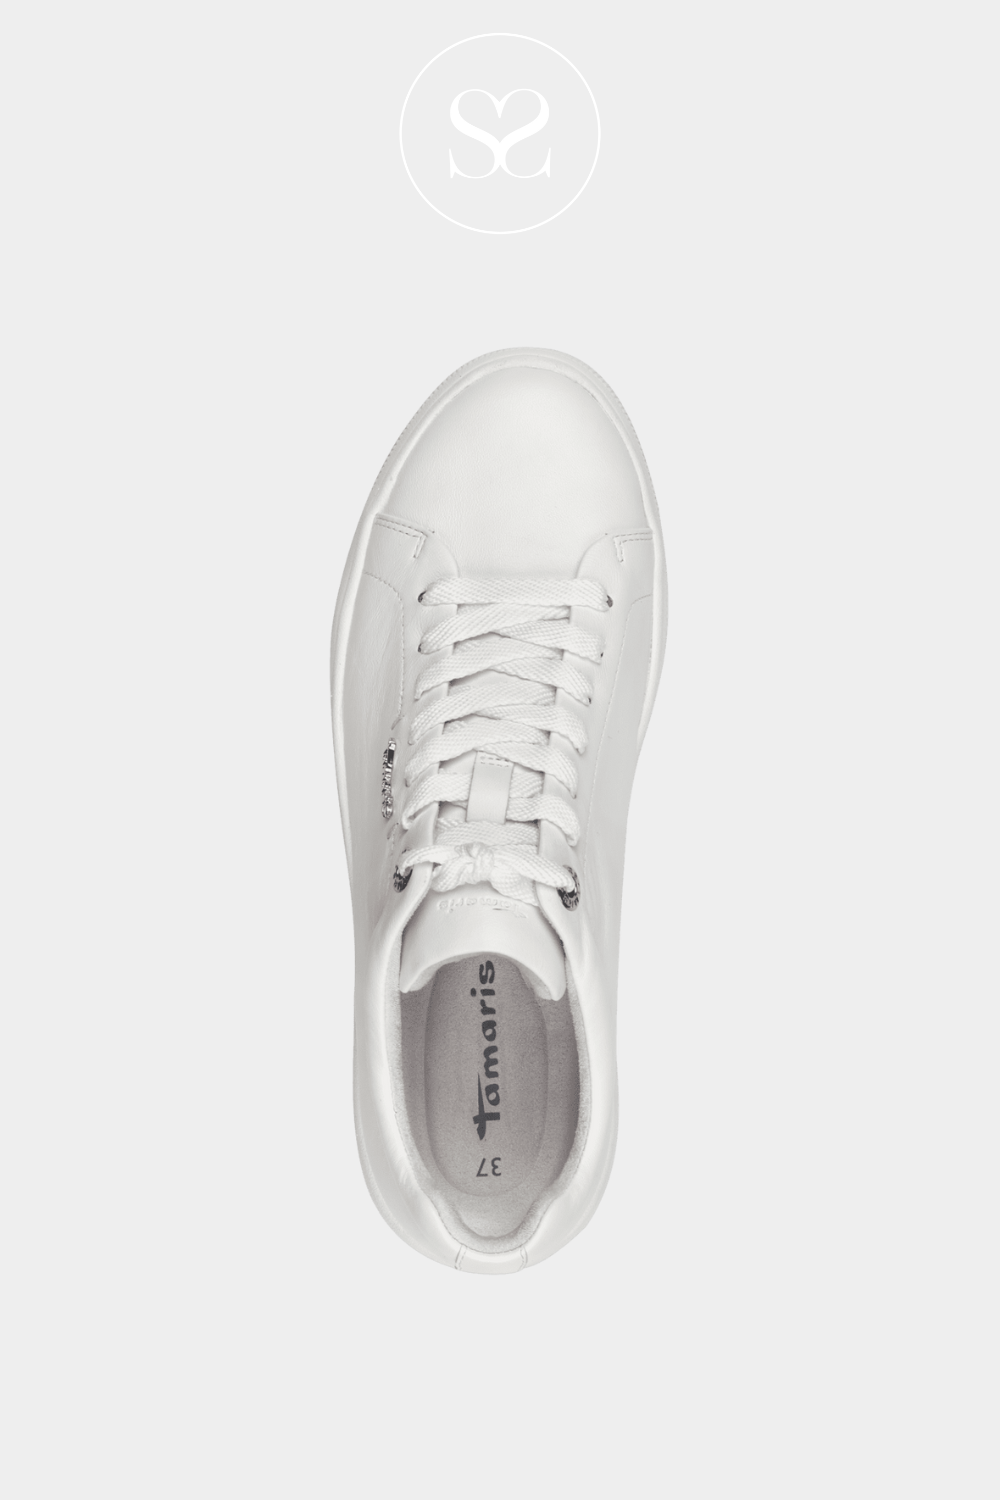 TAMARIS 1-23736-42 WHITE FLATFORM TRAINERS WITH LACES AND SILVER TAMARIS LOGO IN SMALL ON THE SIDE.